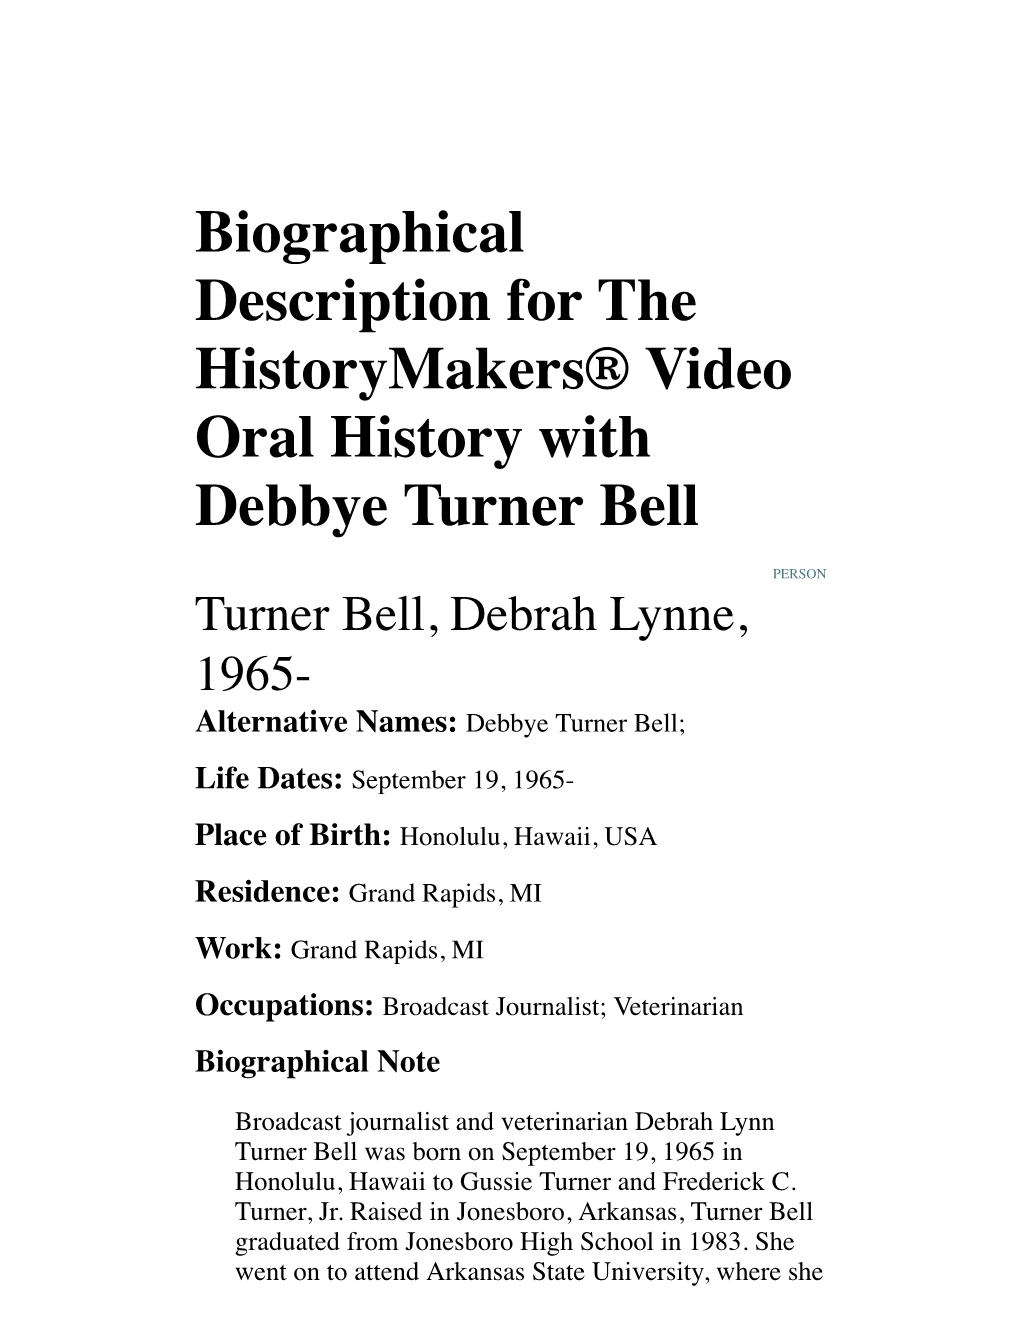 Biographical Description for the Historymakers® Video Oral History with Debbye Turner Bell